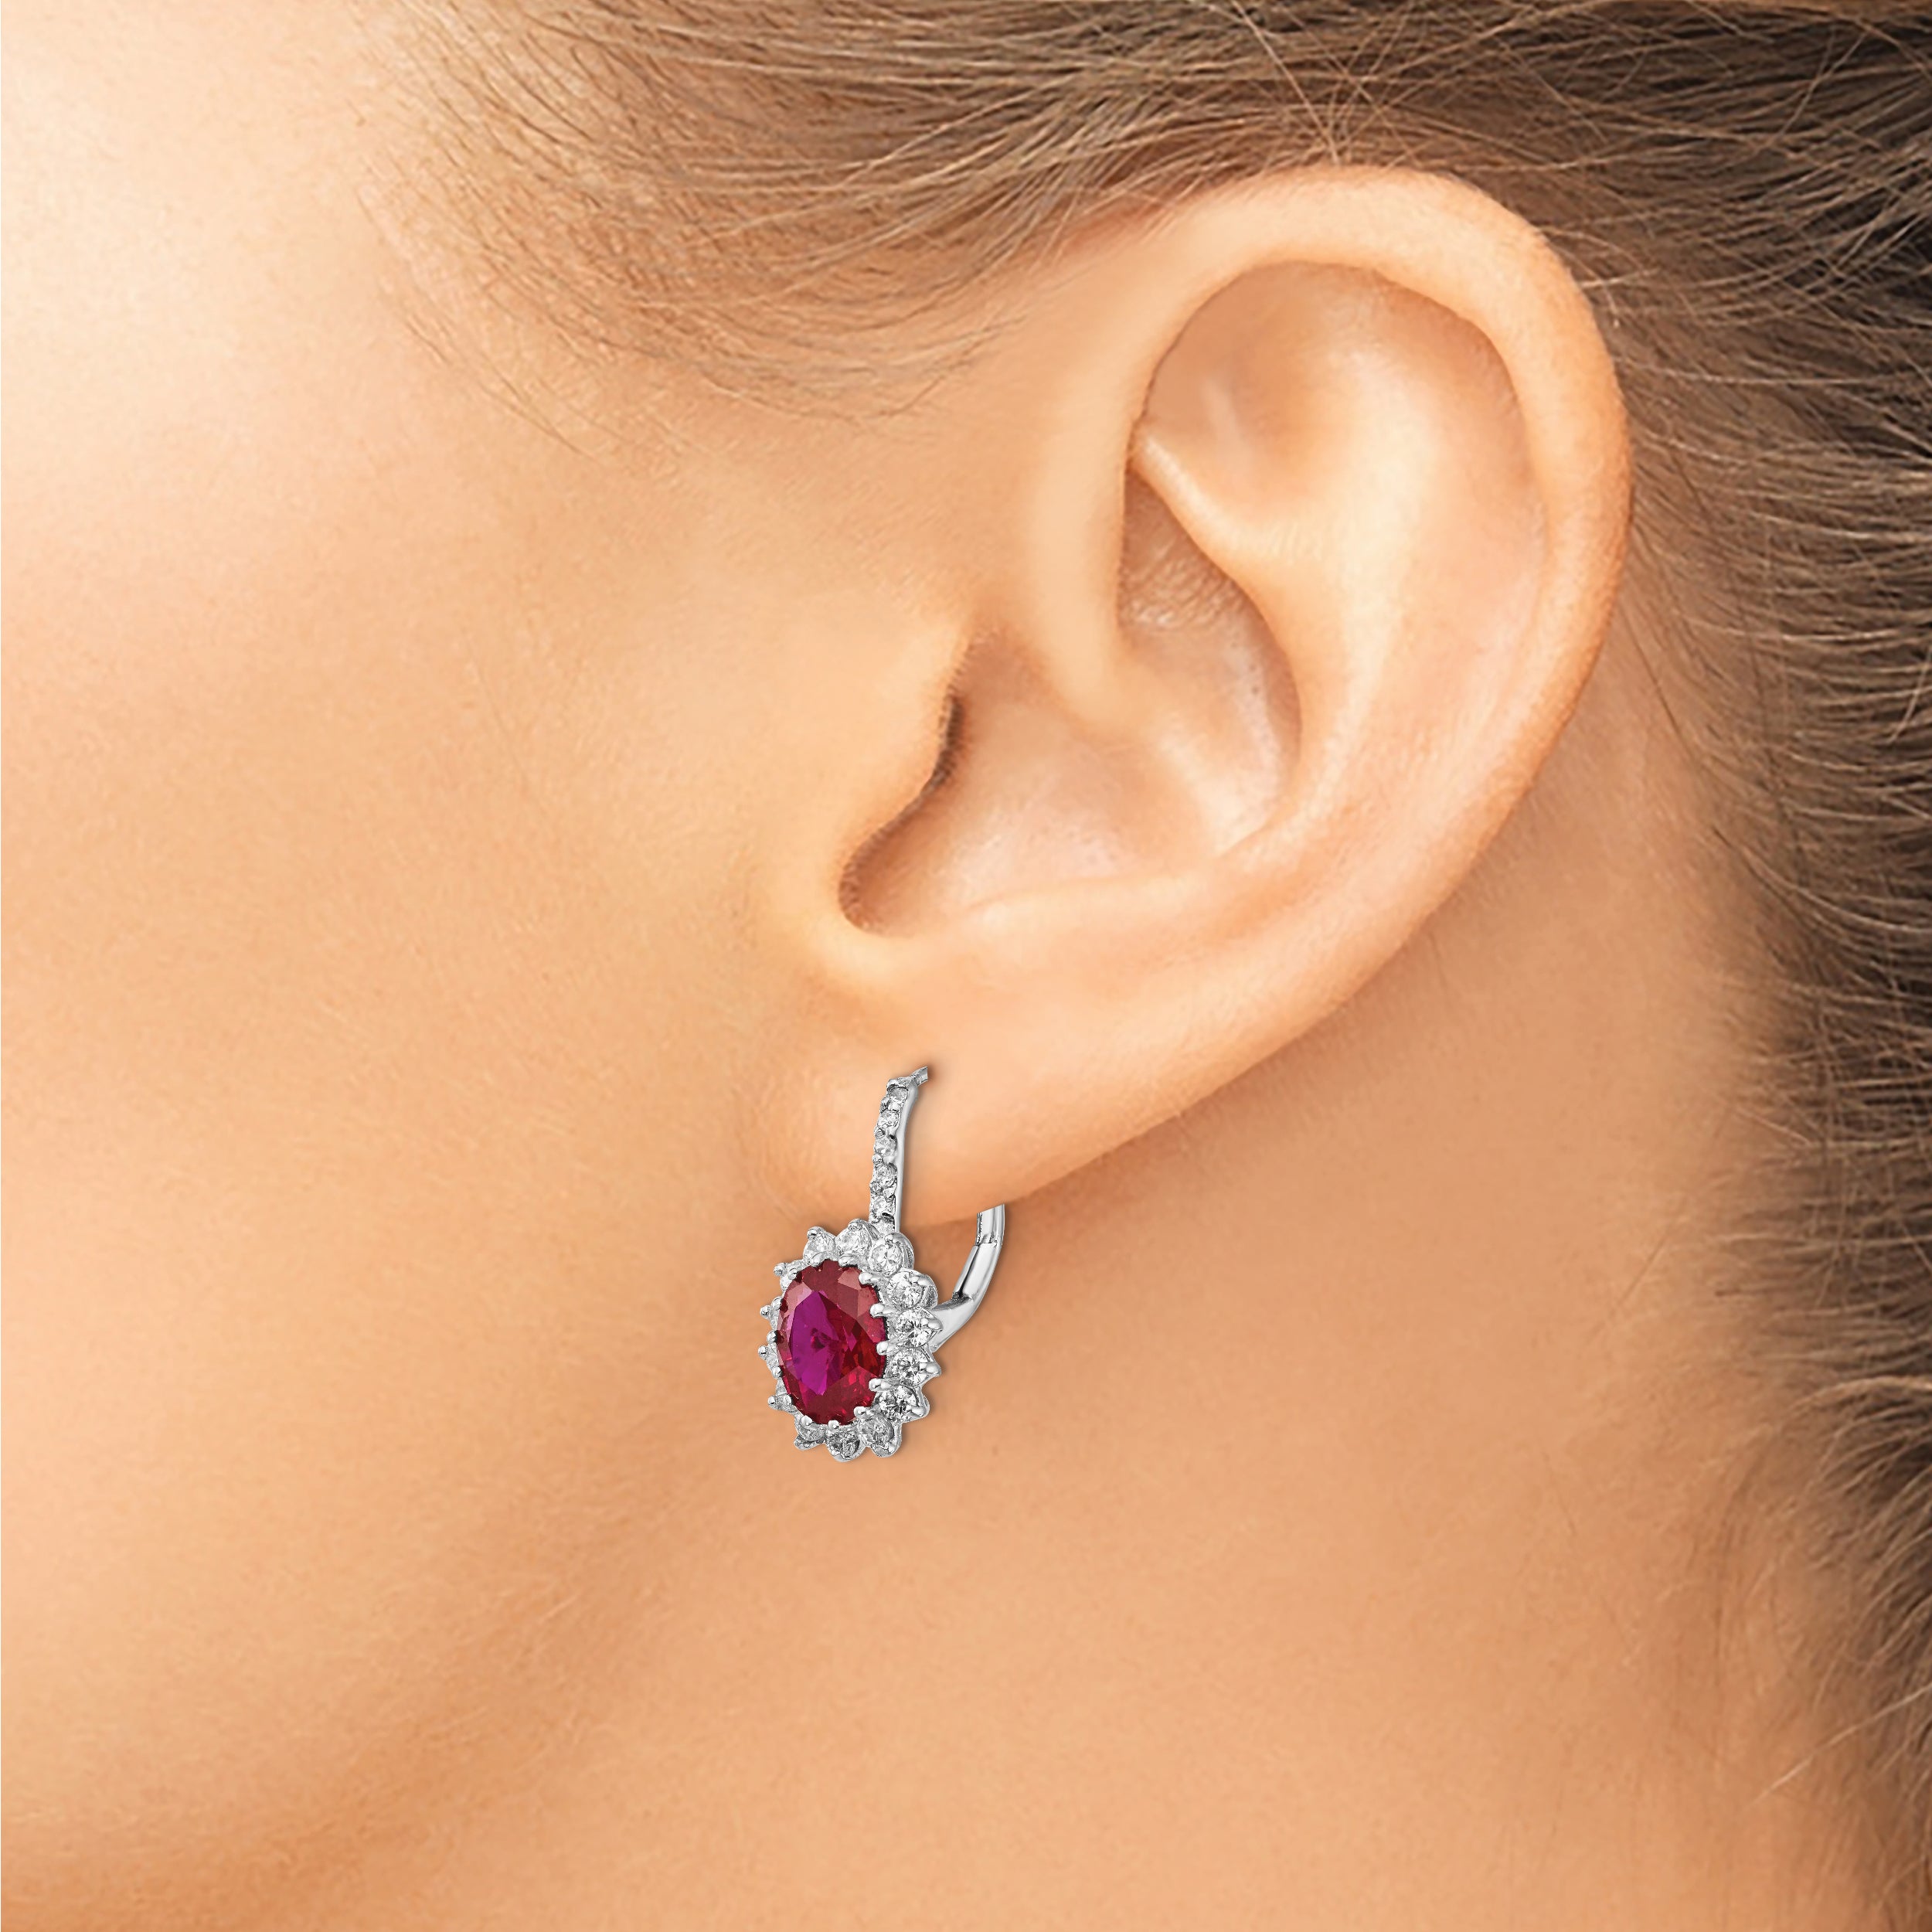 Cheryl M Sterling Silver Rhodium-plated Brilliant-cut Lab Created Ruby and Brilliant-cut White CZ Oval Halo Leverback Earrings